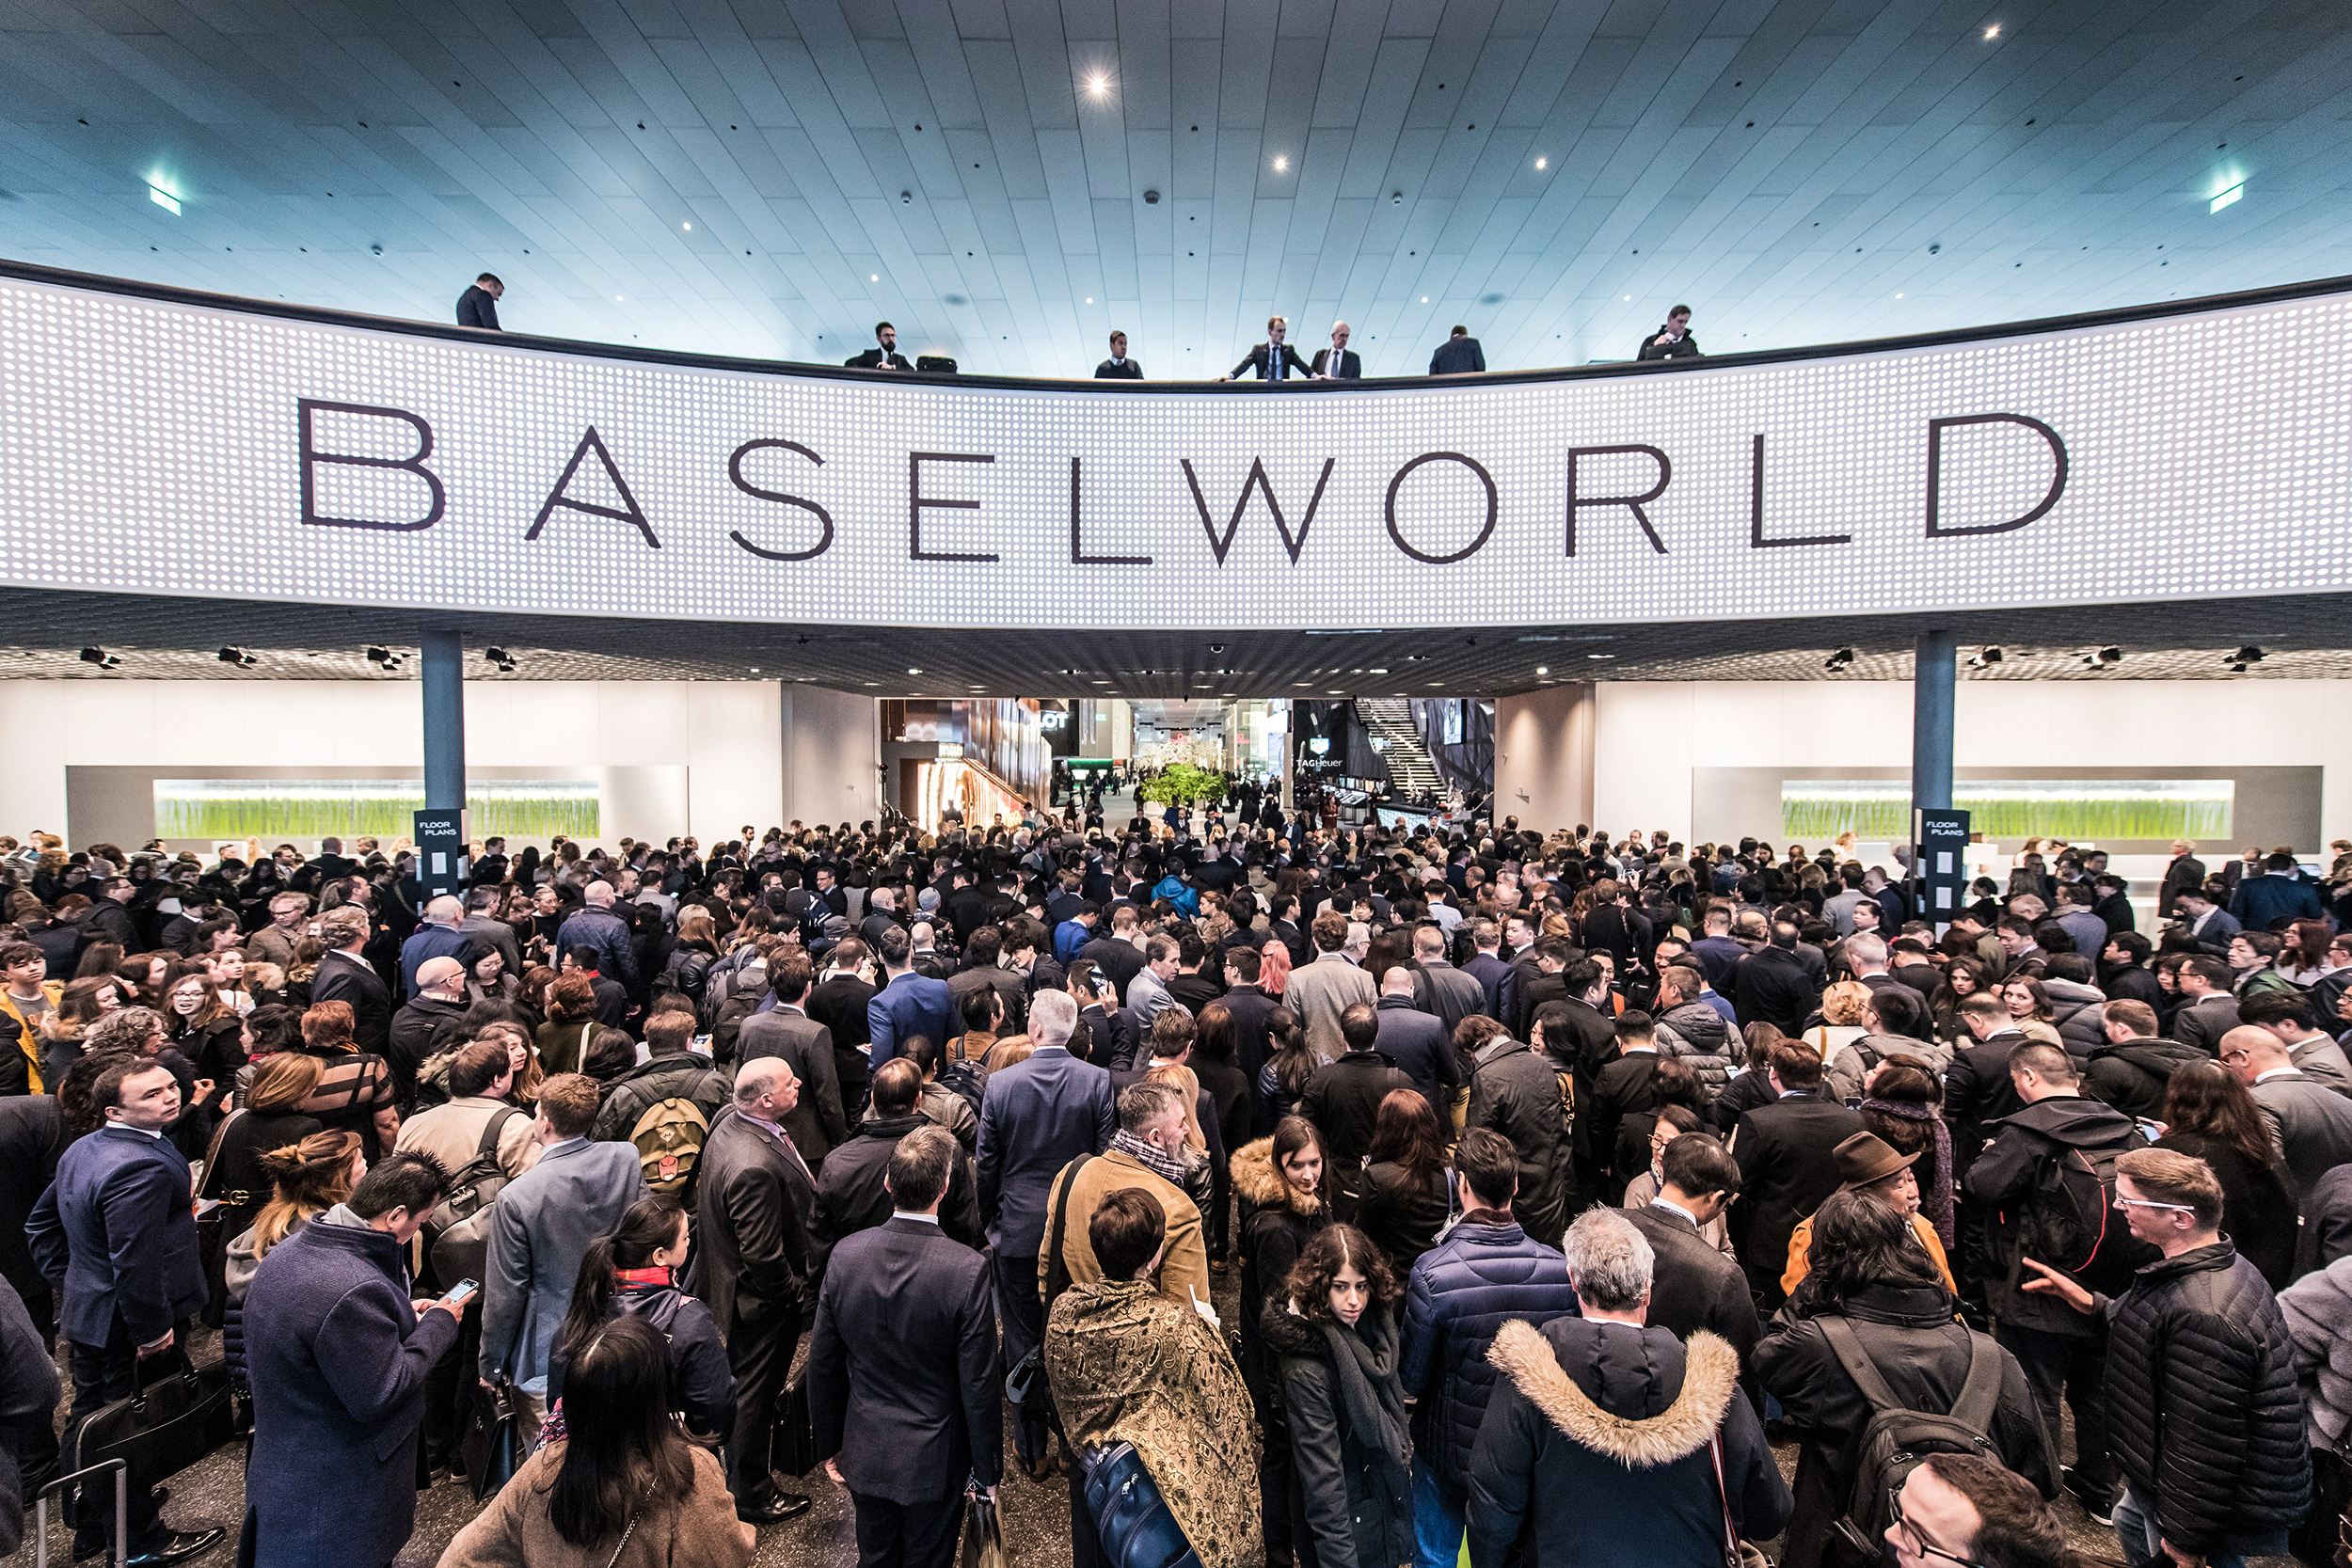 A Brief History of Baselworld – WristReview.com – Featuring Watch Reviews